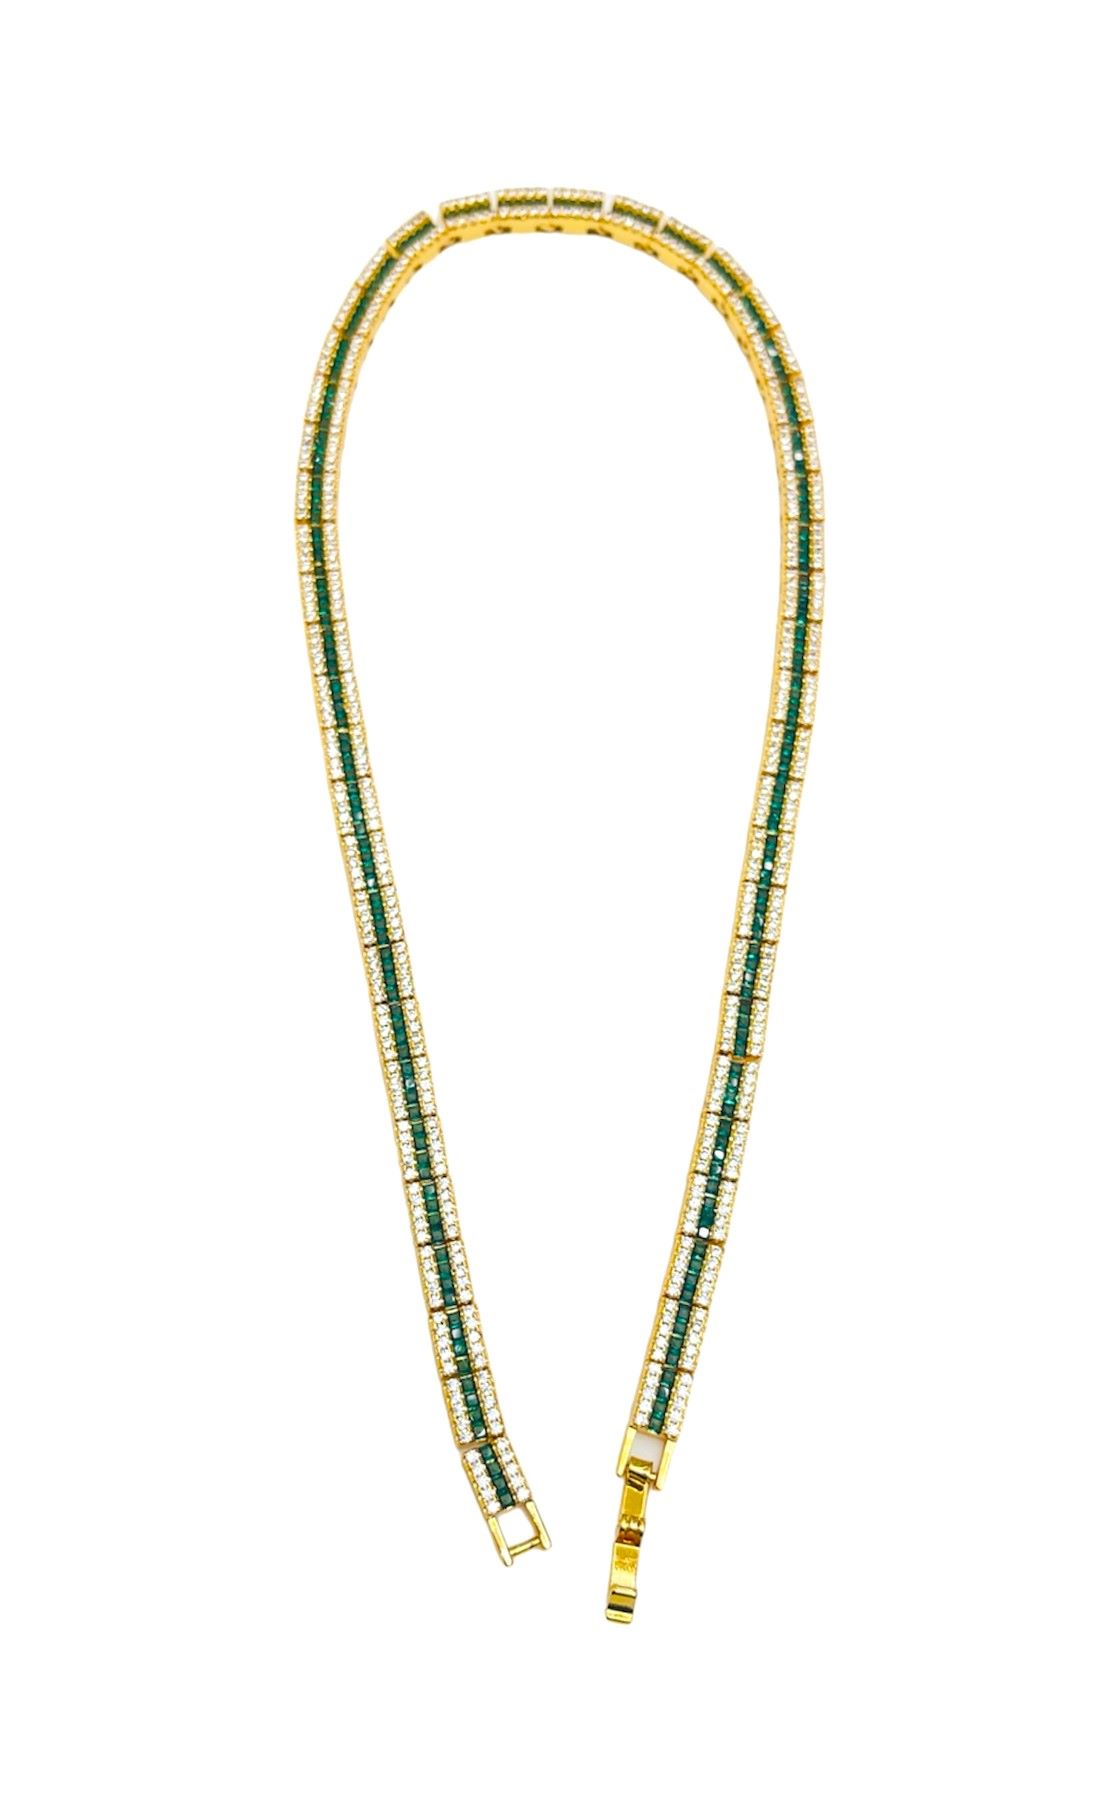 BAR LINES GREEN TENNIS 35CM NECKLACE GOLD PLATED